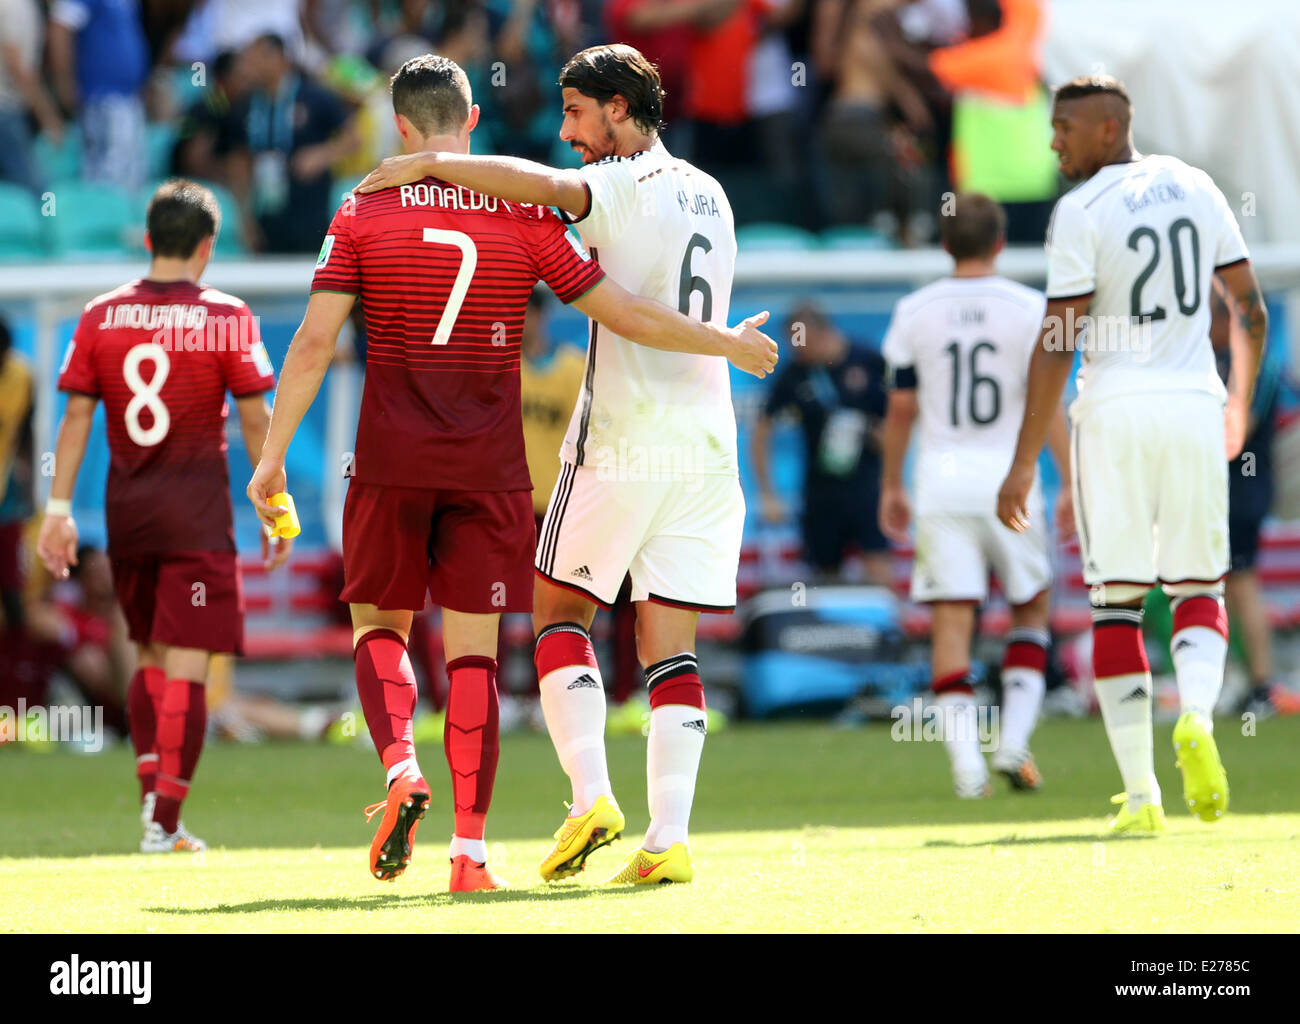 Savador, Brazil. 16th June, 2014. World Cup finals 2014. Germany versus Portugal. Cristiano Ronaldo disppointed at end of first half comforted by club team mate Khedira Credit:  Action Plus Sports/Alamy Live News Stock Photo